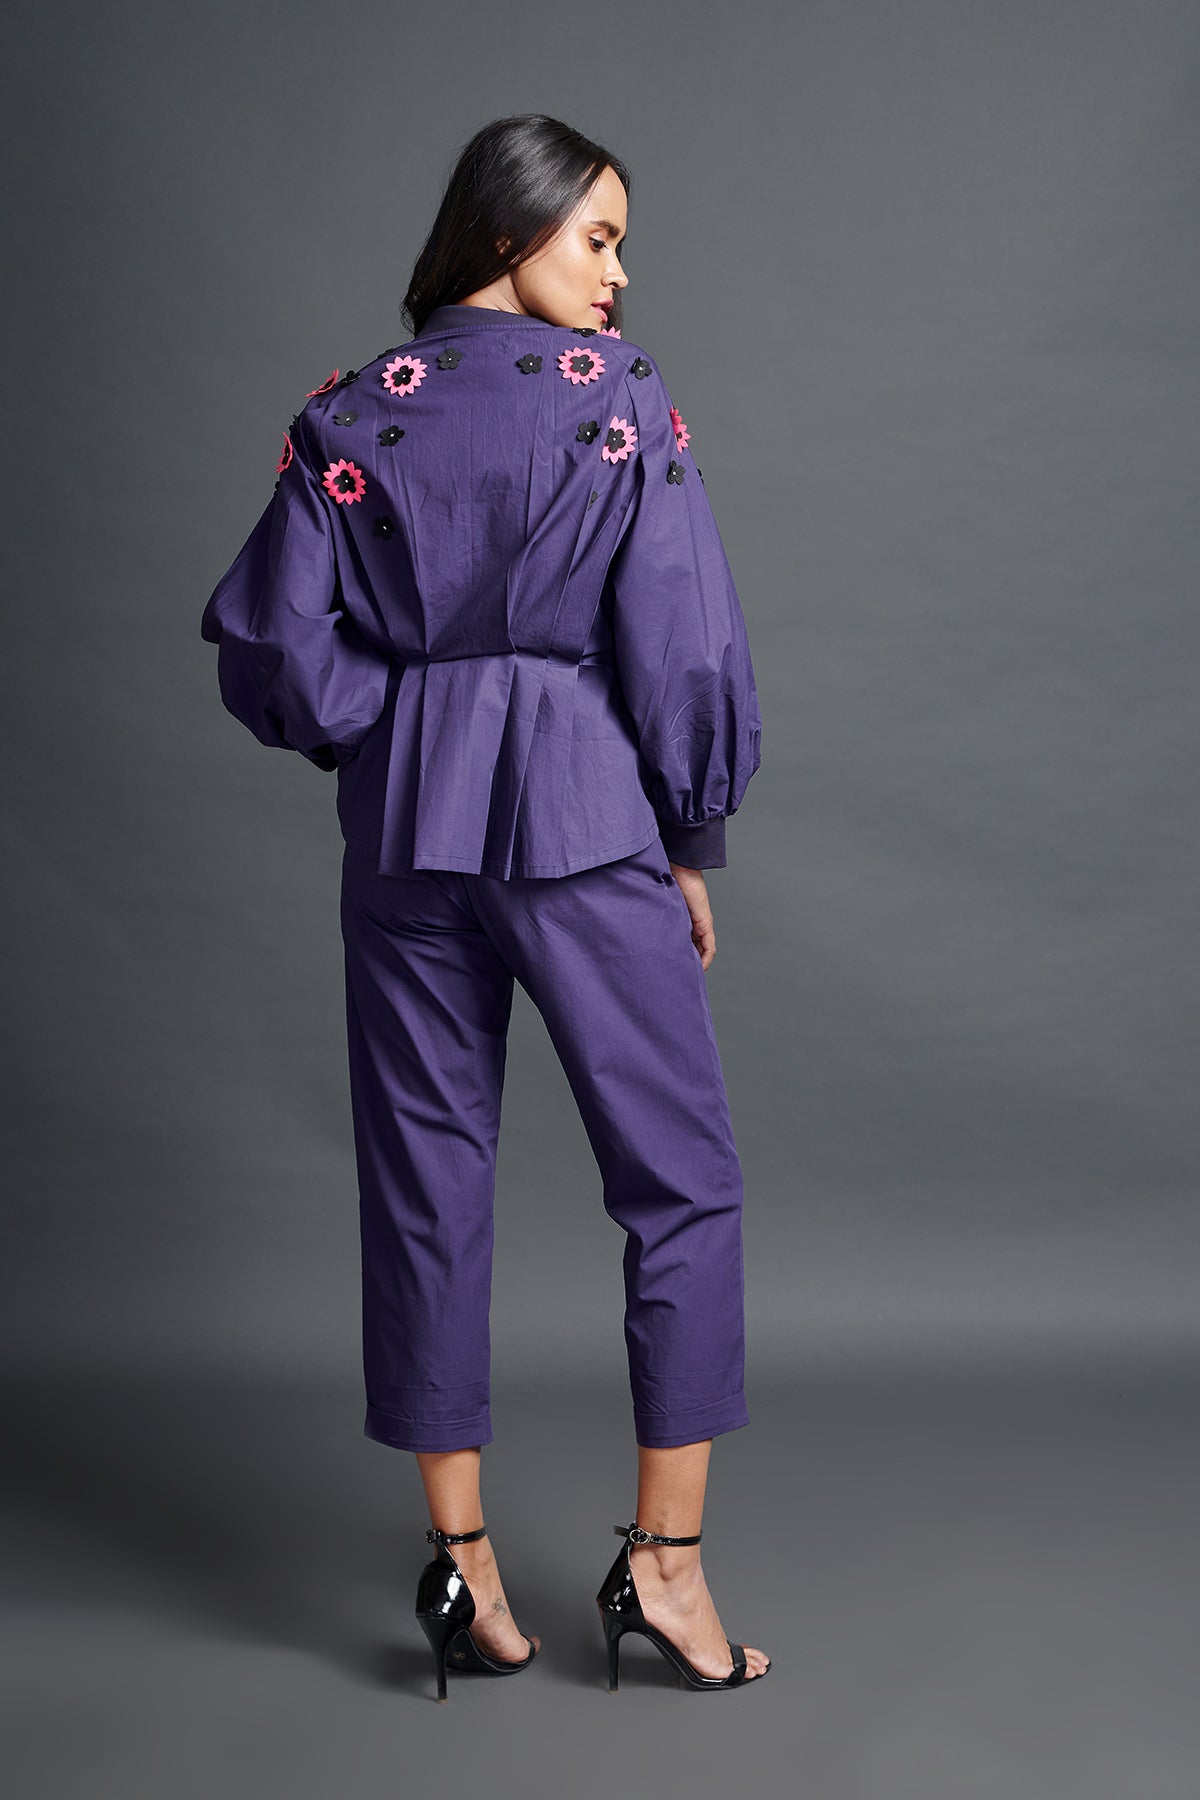 Image of PURPLE SHIRT IN COTTON BASE WITH PLEATED CONFETTI DETAIL. IT IS PAIRED WITH MATCHING PANTS. From savoirfashions.com